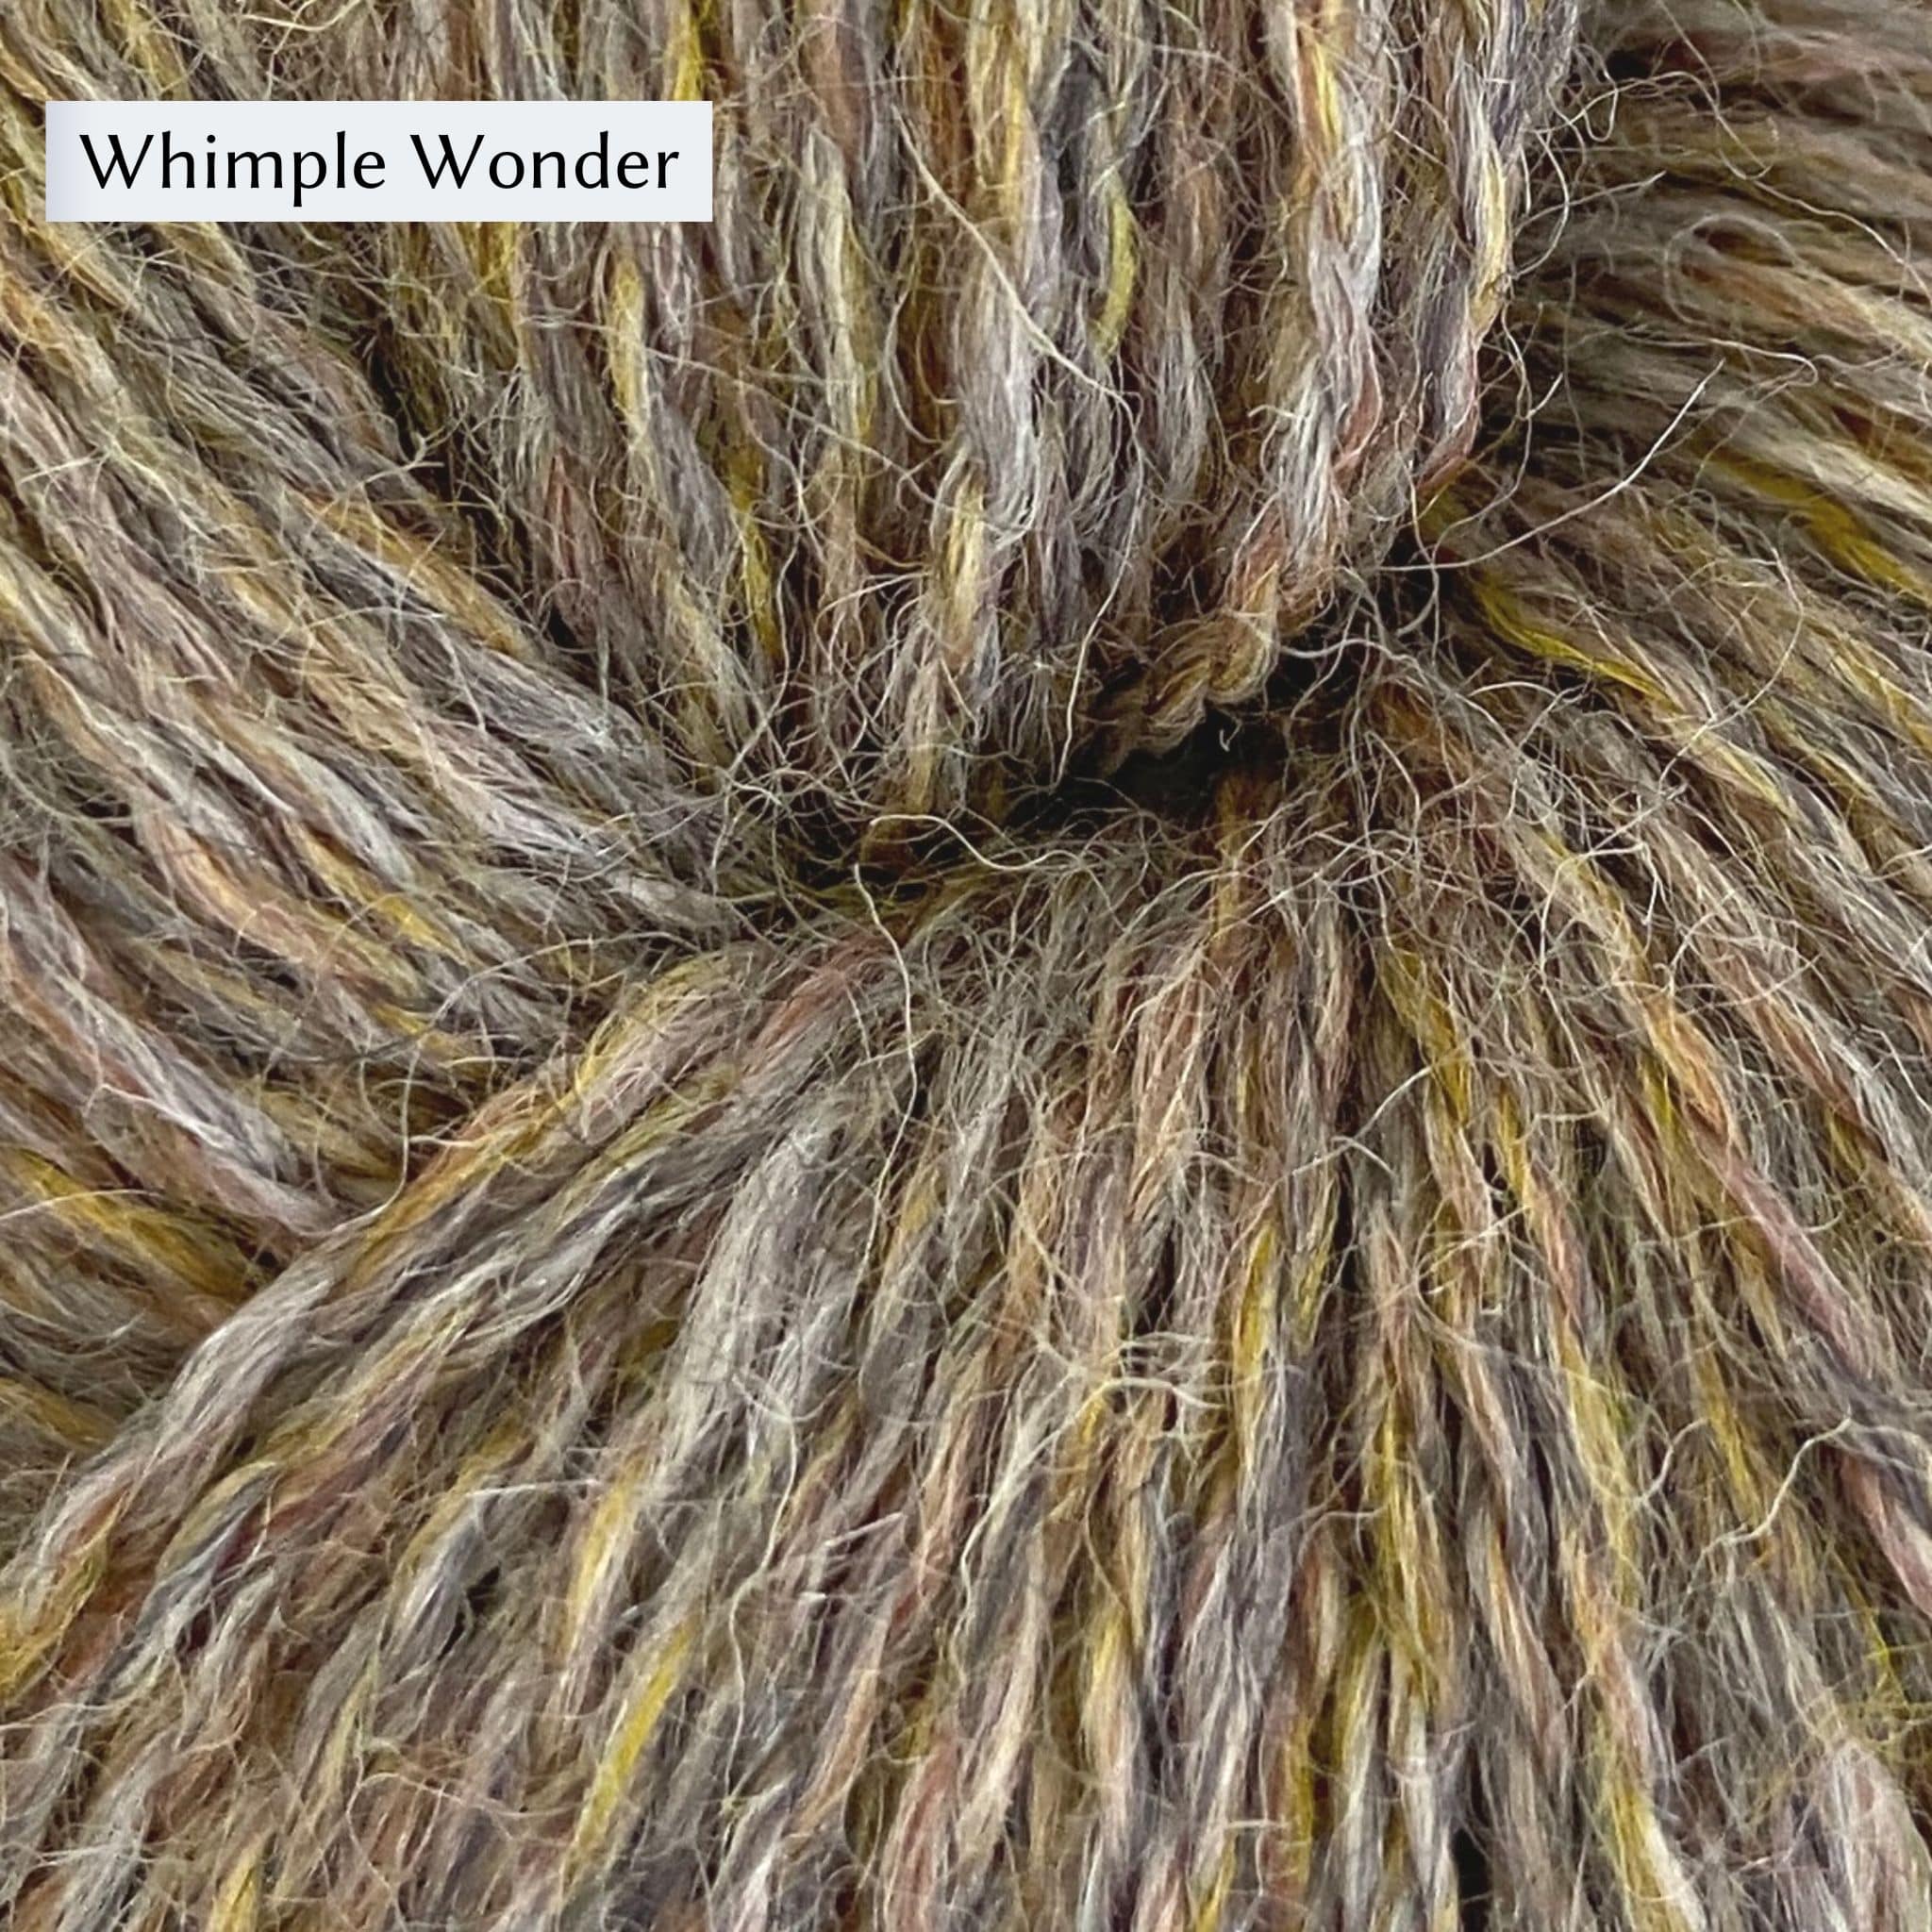 John Arbon Appledore DK, a DK weight British yarn, in color Whimple Wonder, a grey with yellow and brown heathering